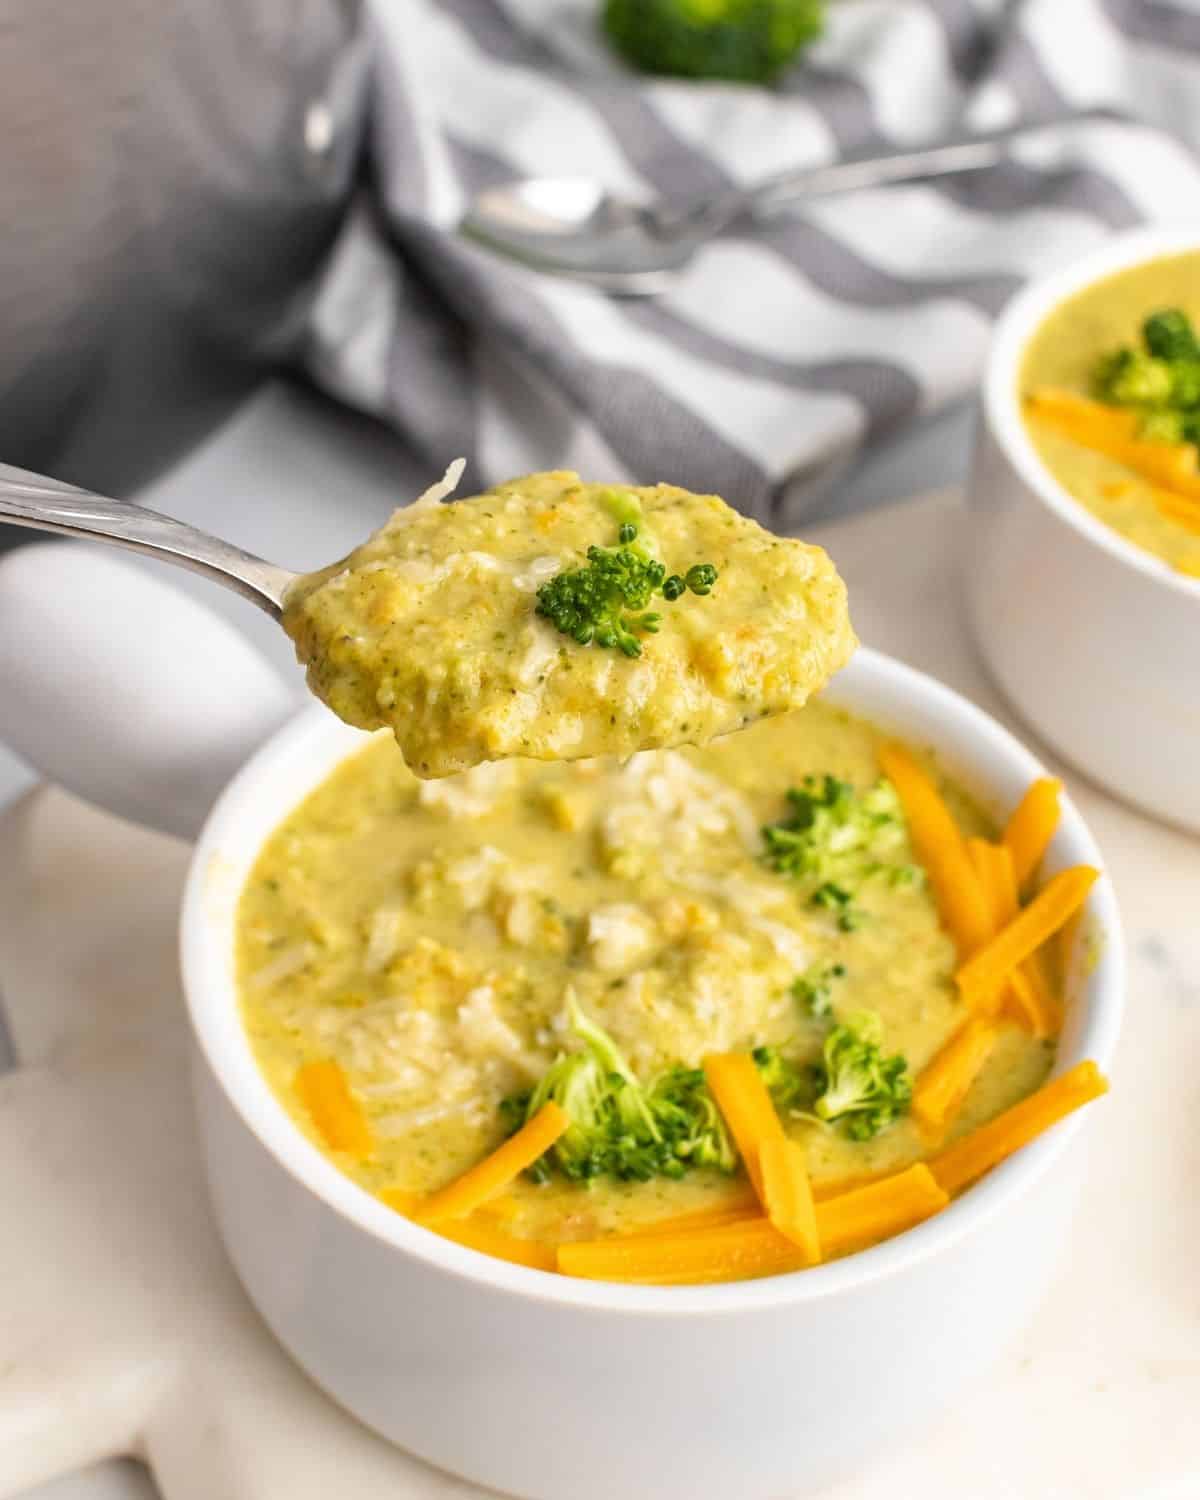 a close up spoonful picture of the broccoli cheddar soup.